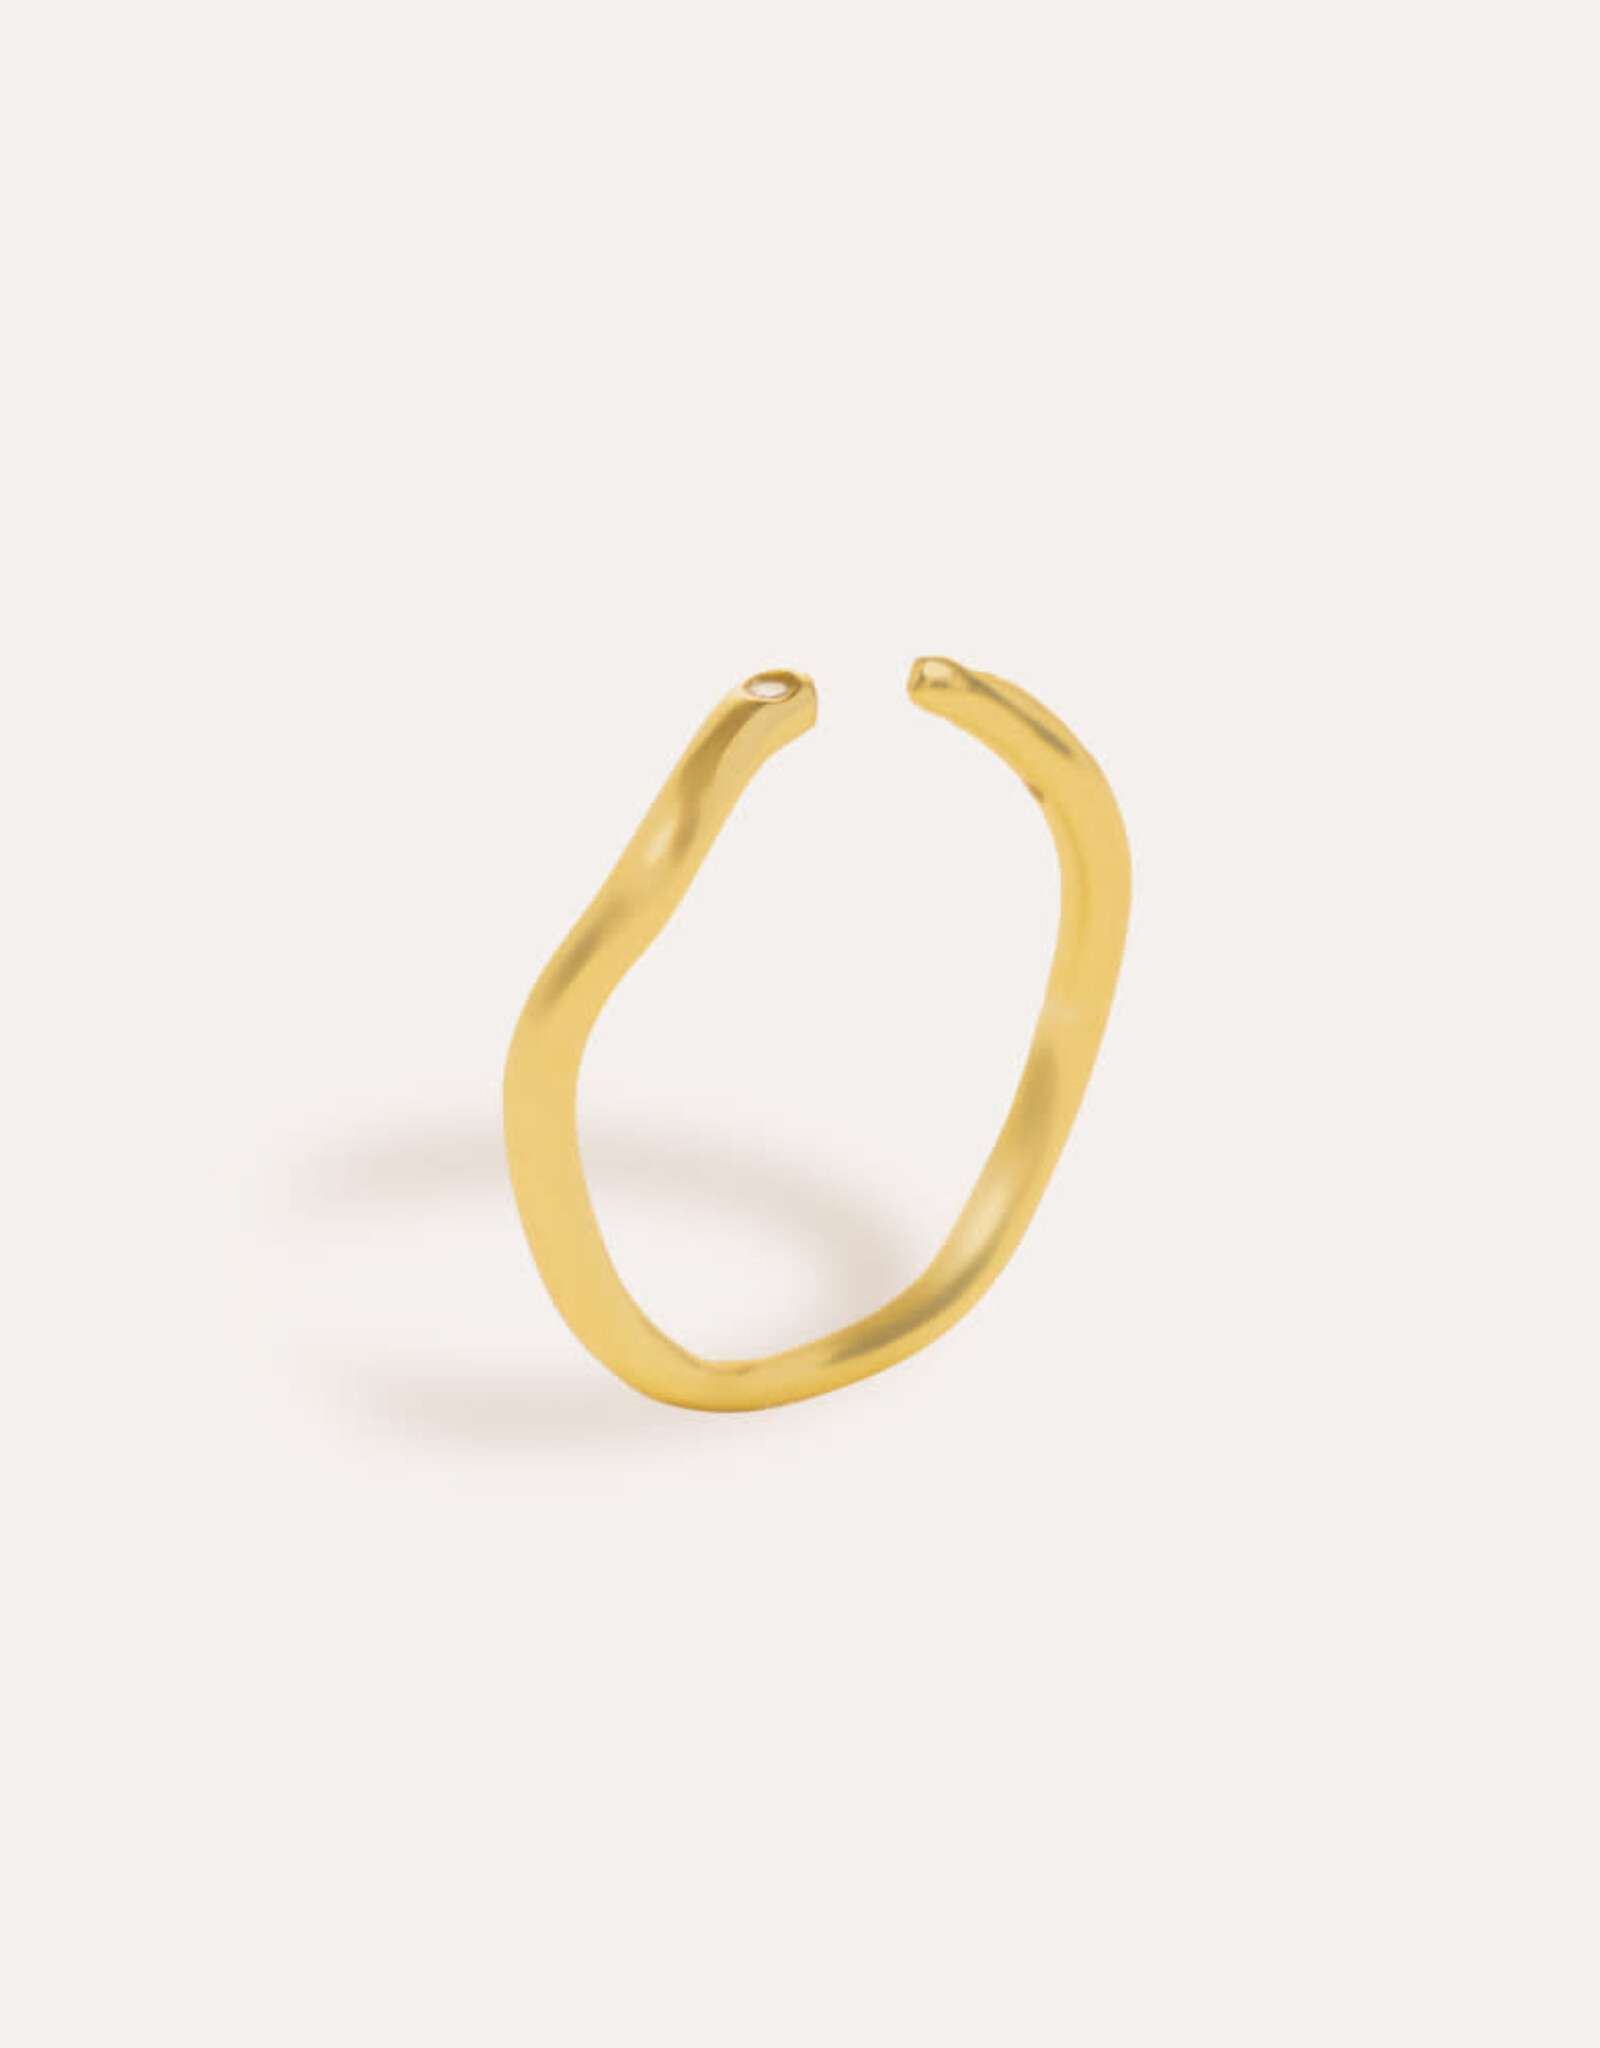 TamCode Ania Ring Gold One Size